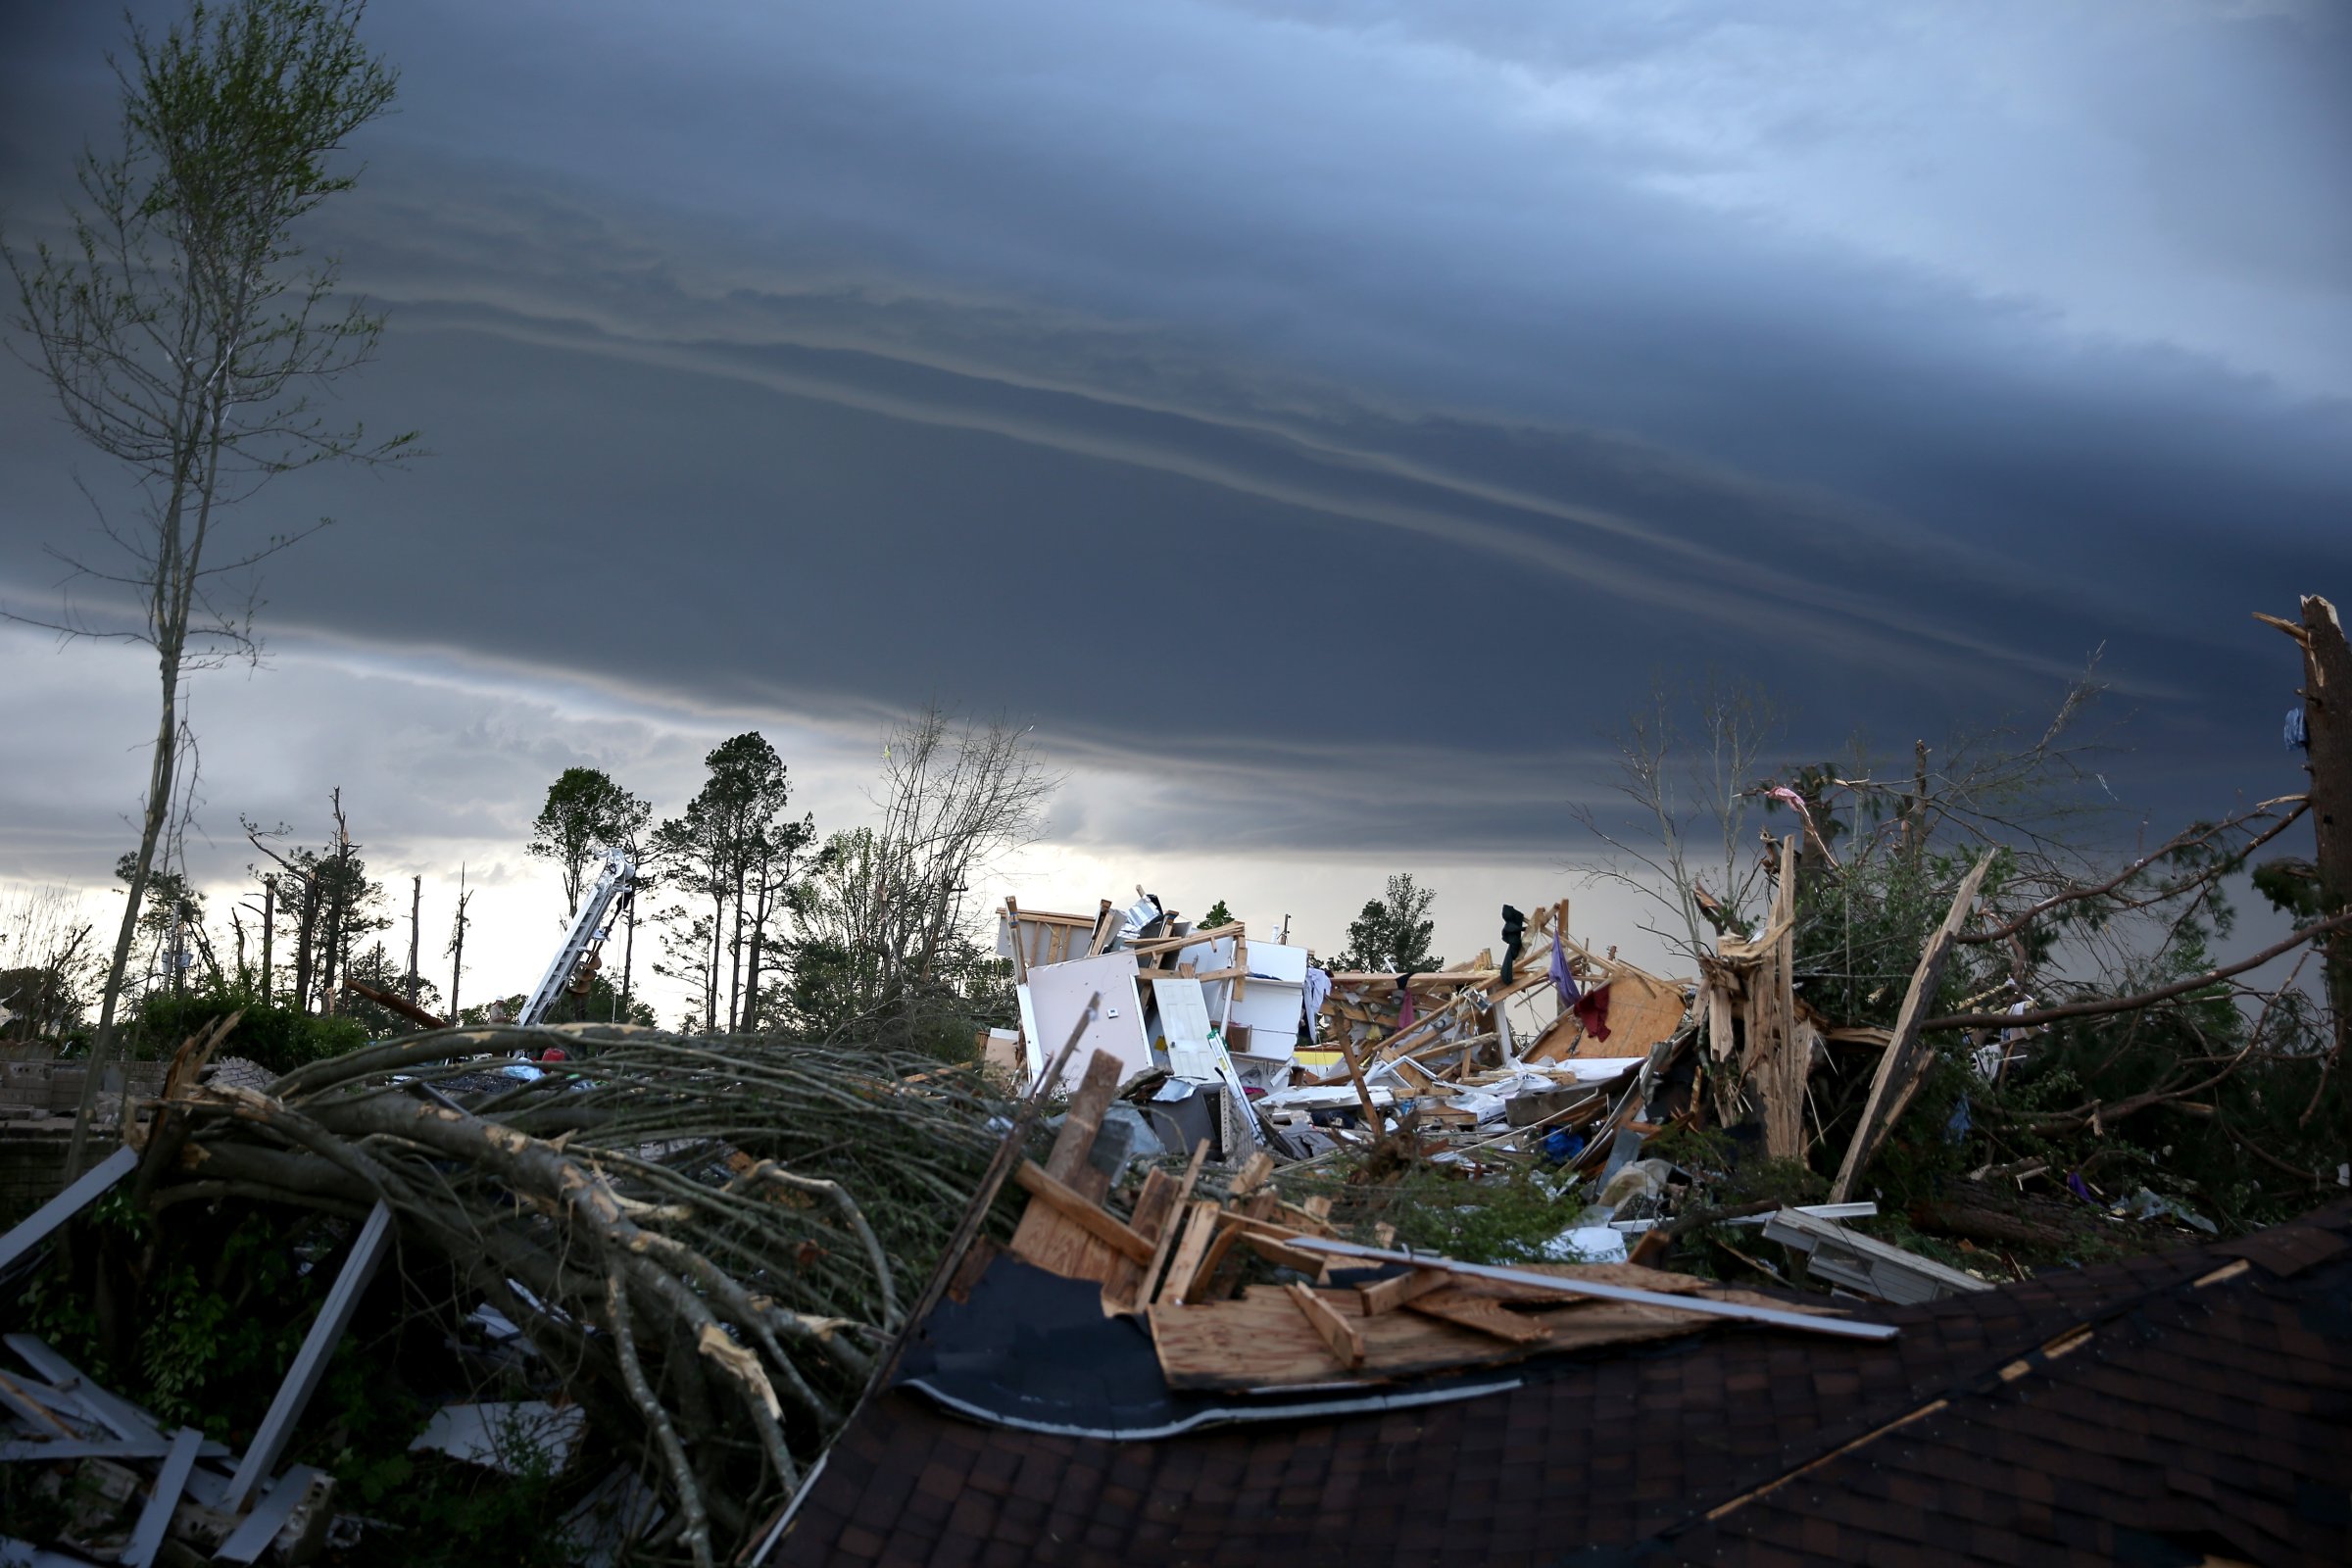 Widespread Damage And Casualties After Tornadoes Rip Through South